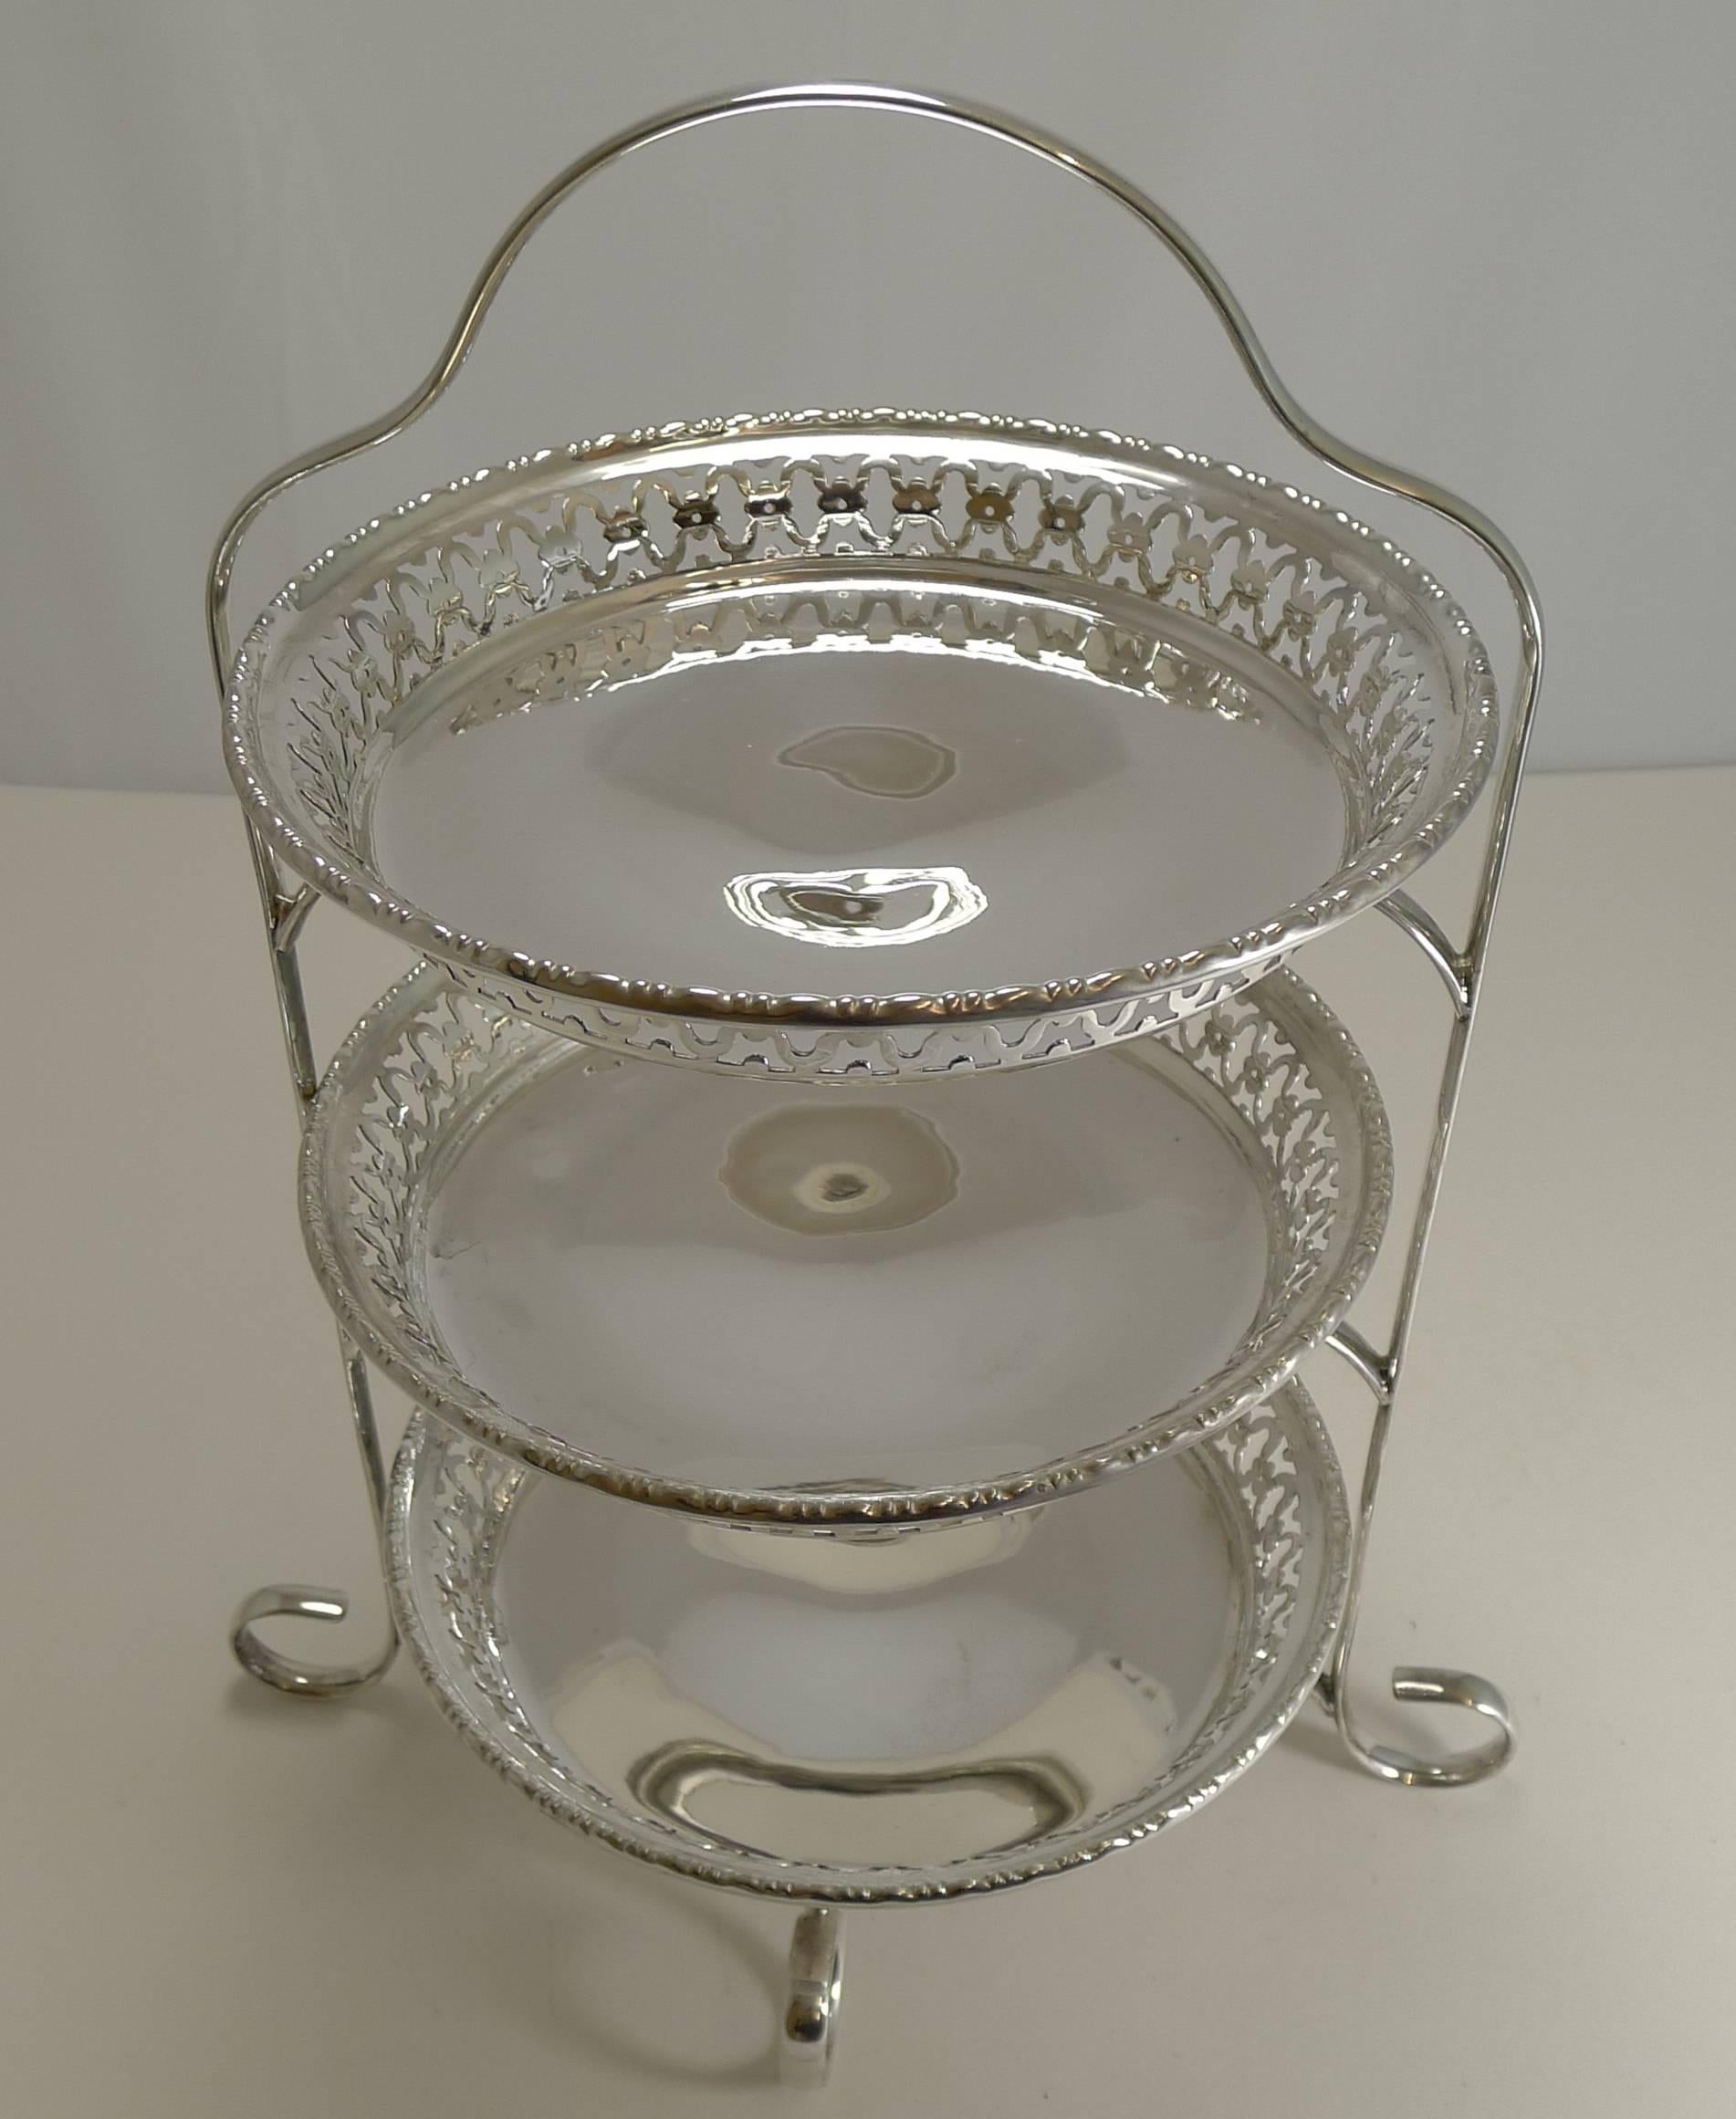 Edwardian Antique English Cake Stand in Silver Plate, circa 1900